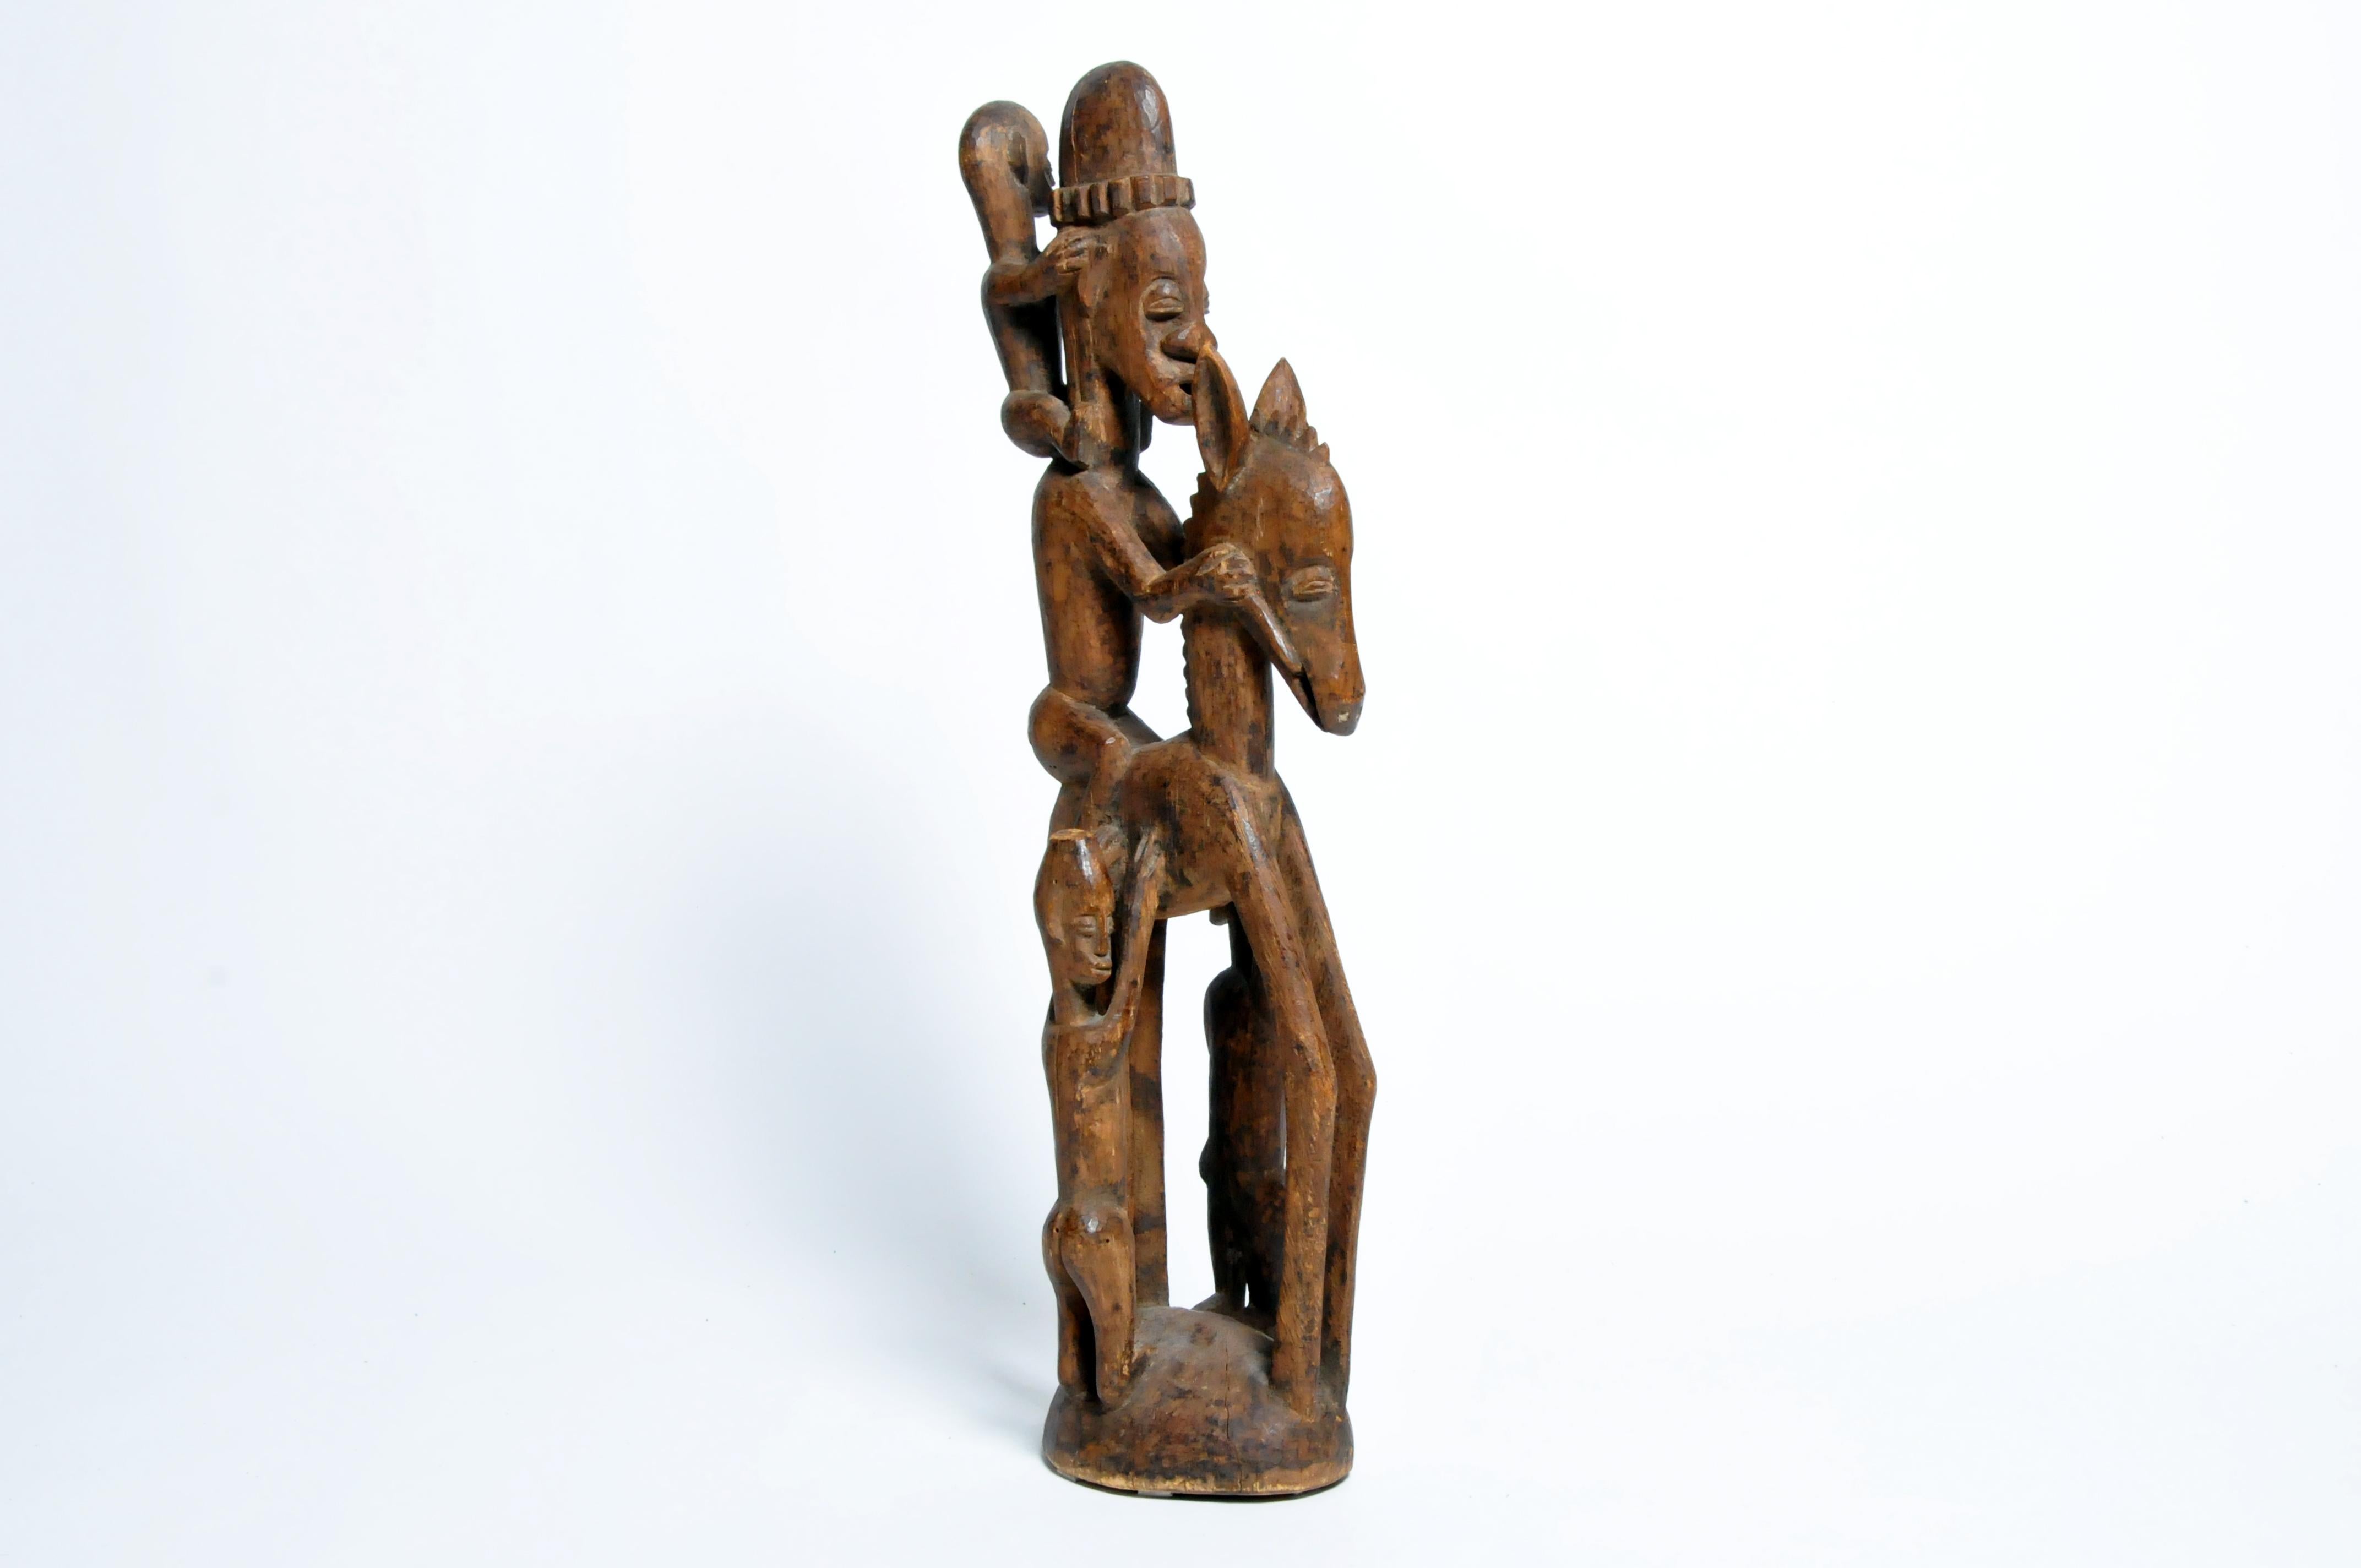 This elegantly carved horse with seated rider dates to the mid-20th century. Carved softwood, species unknown. In Senufo art, the horse symbolizes power and here it is overpowered by the authority of the rider. The disproportion between the large